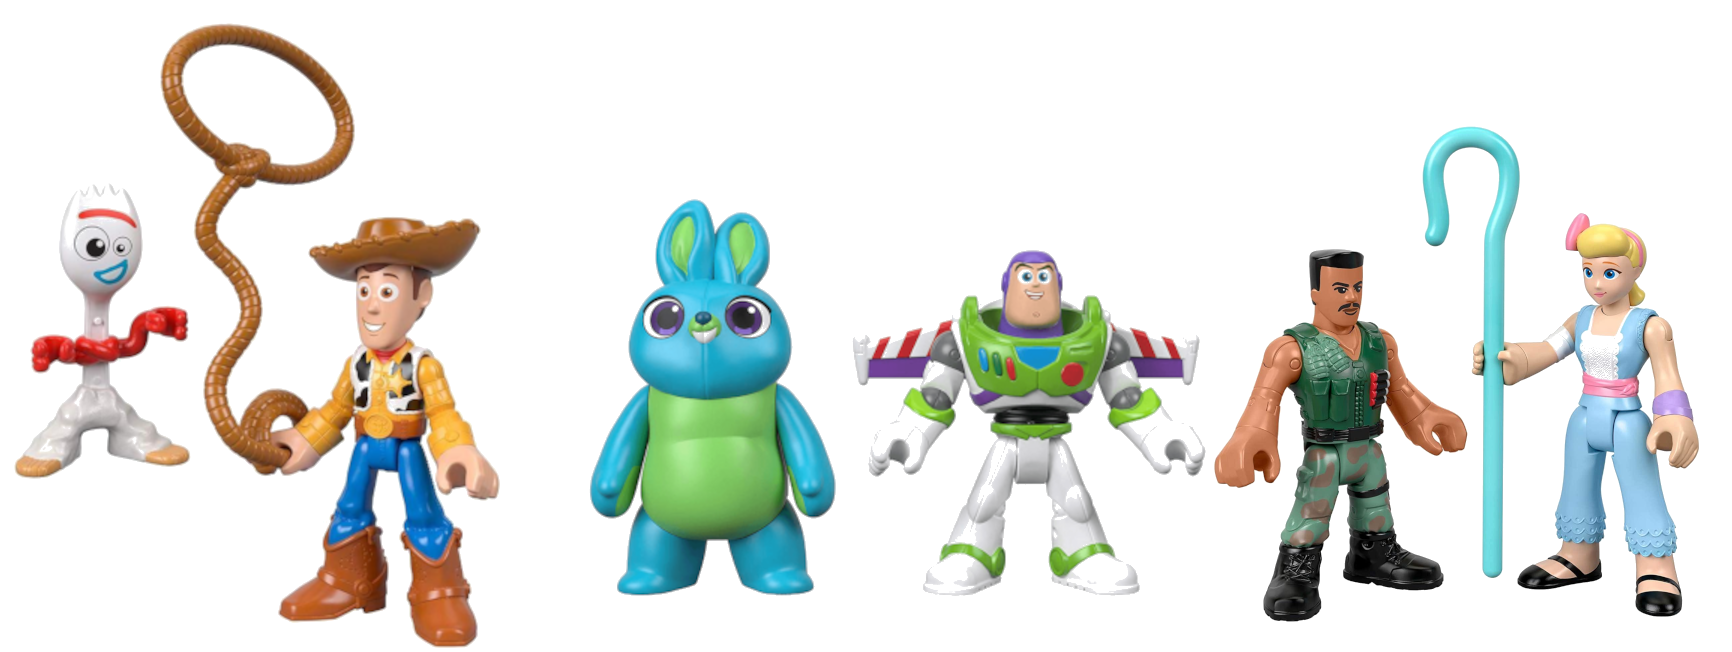 Imaginext Toy Story 4 Figure Packs